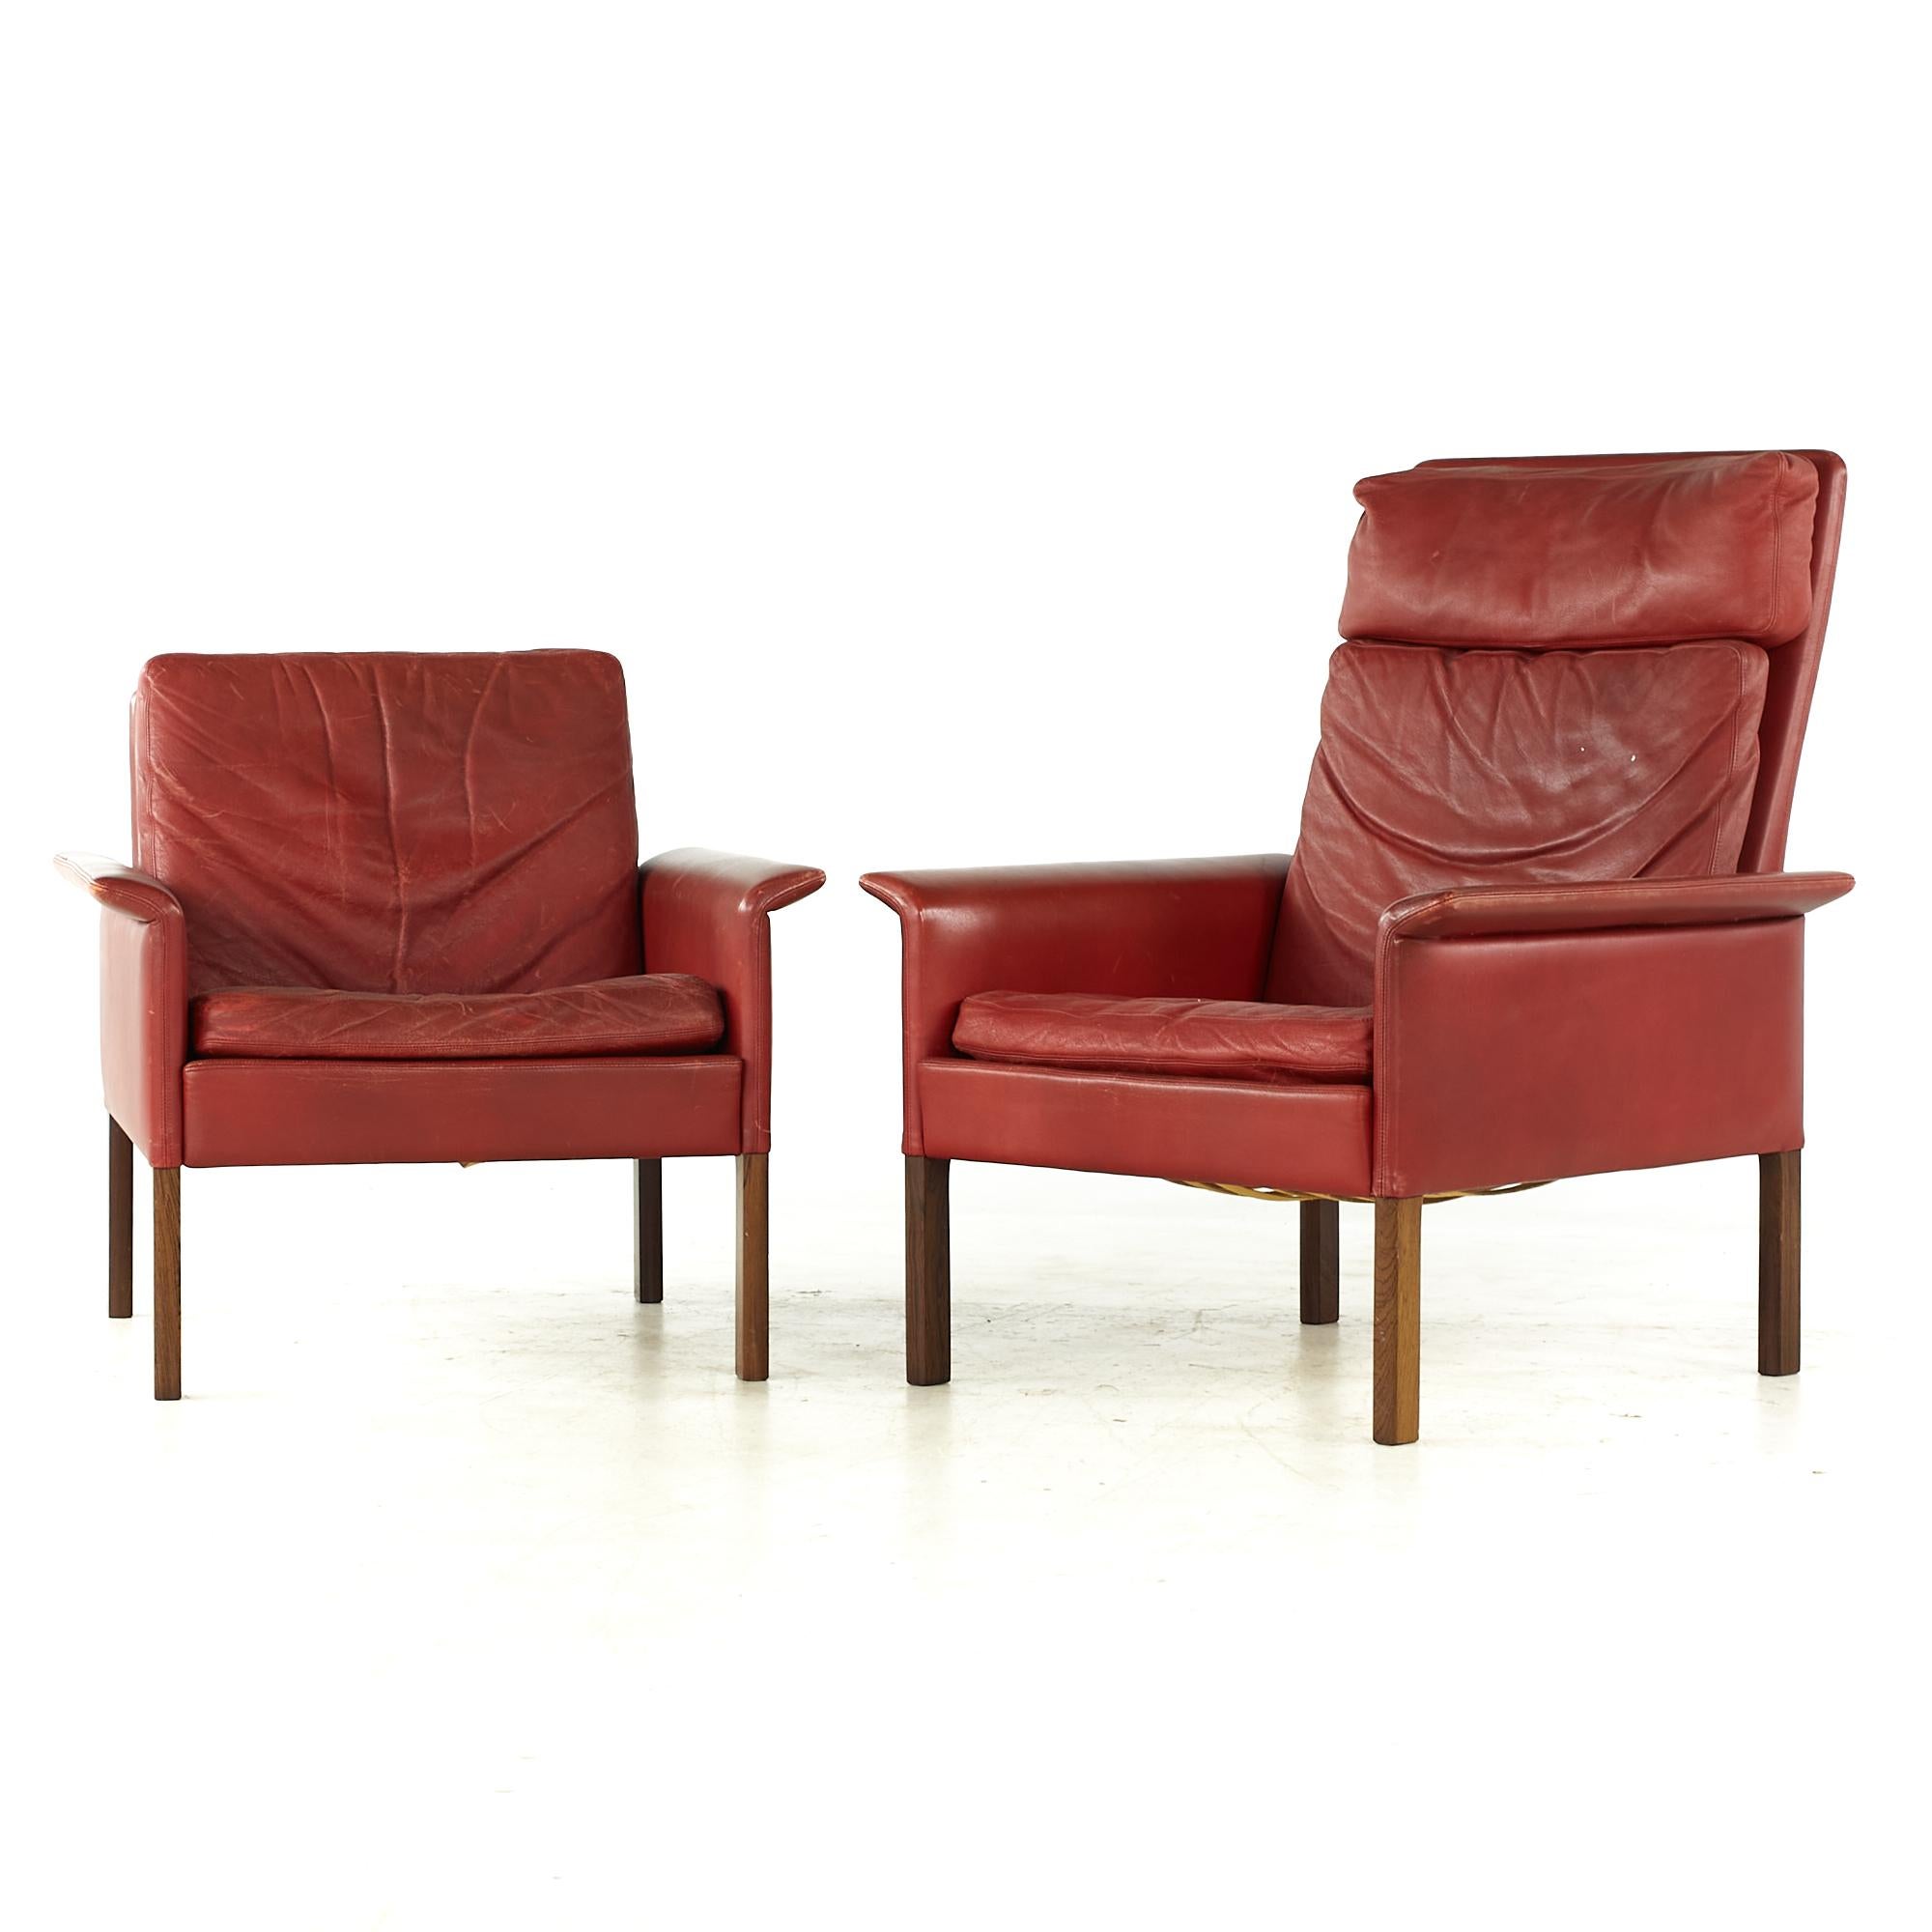 Mid-Century Modern Hans Olsen Midcentury Danish Rosewood and Red Leather Chairs, Pair For Sale